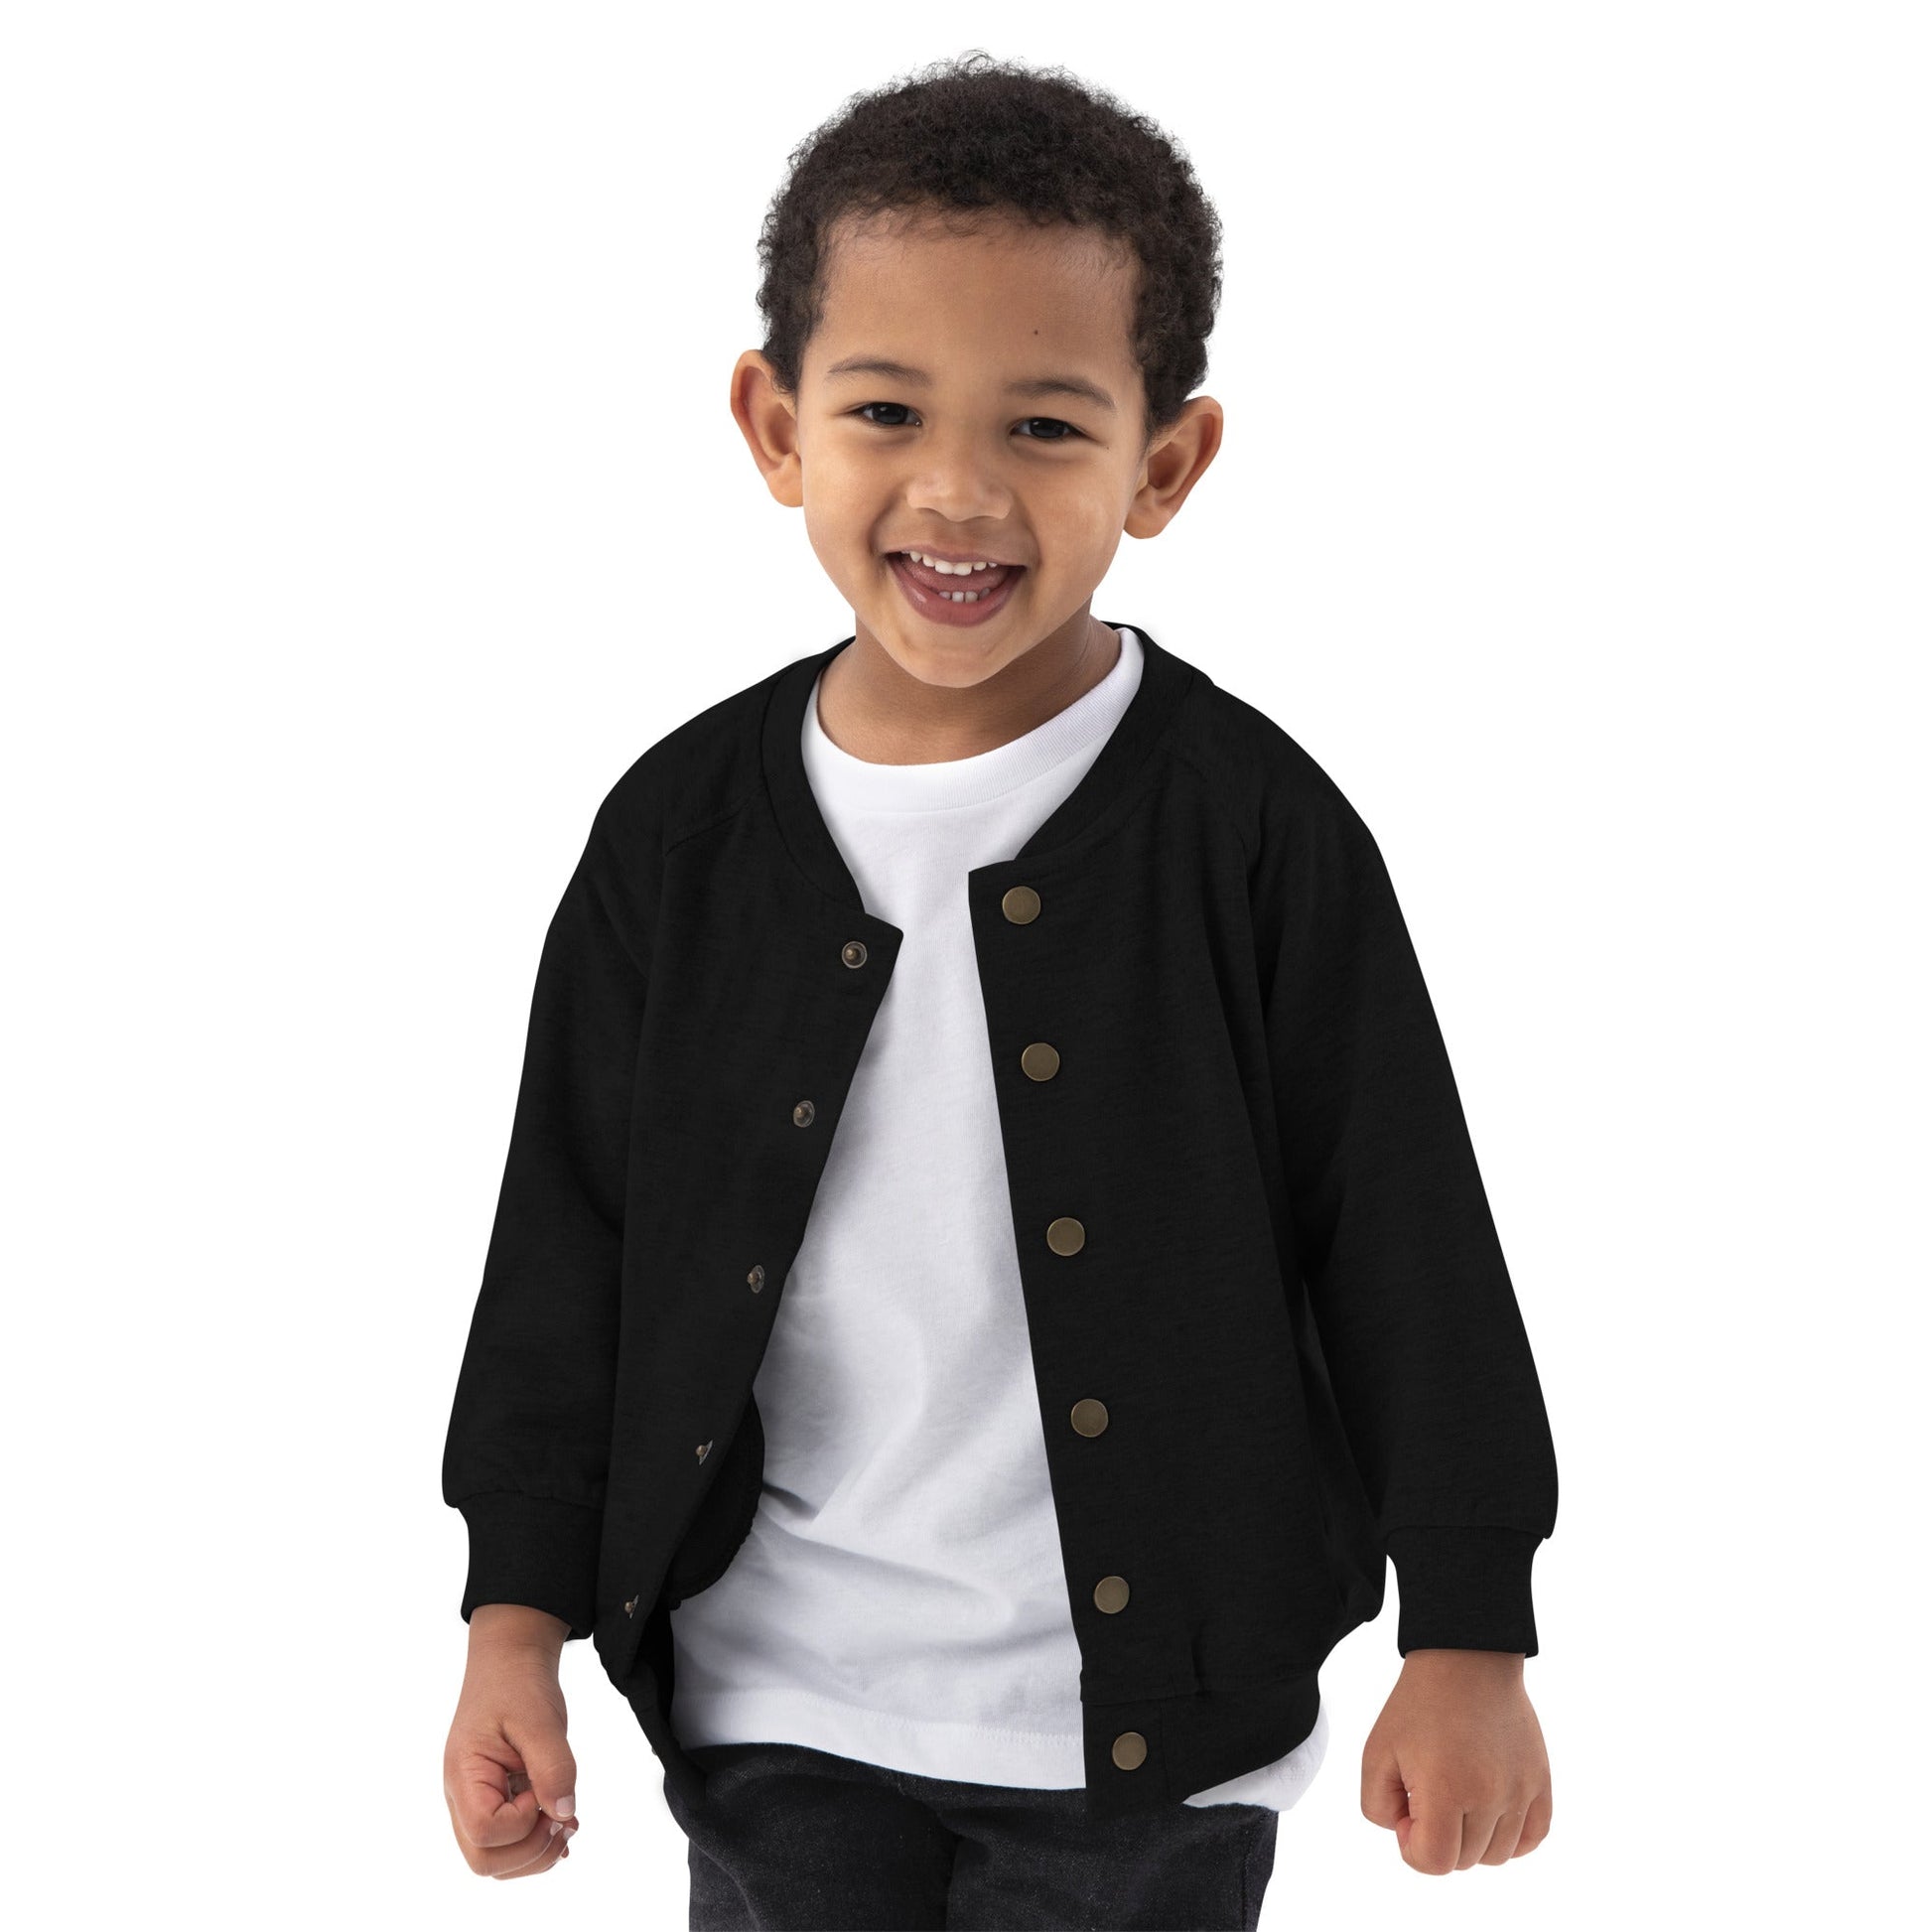 Organic Bomber Jacket for Toddlers with Embroidered "Faith" Cross - faithbook